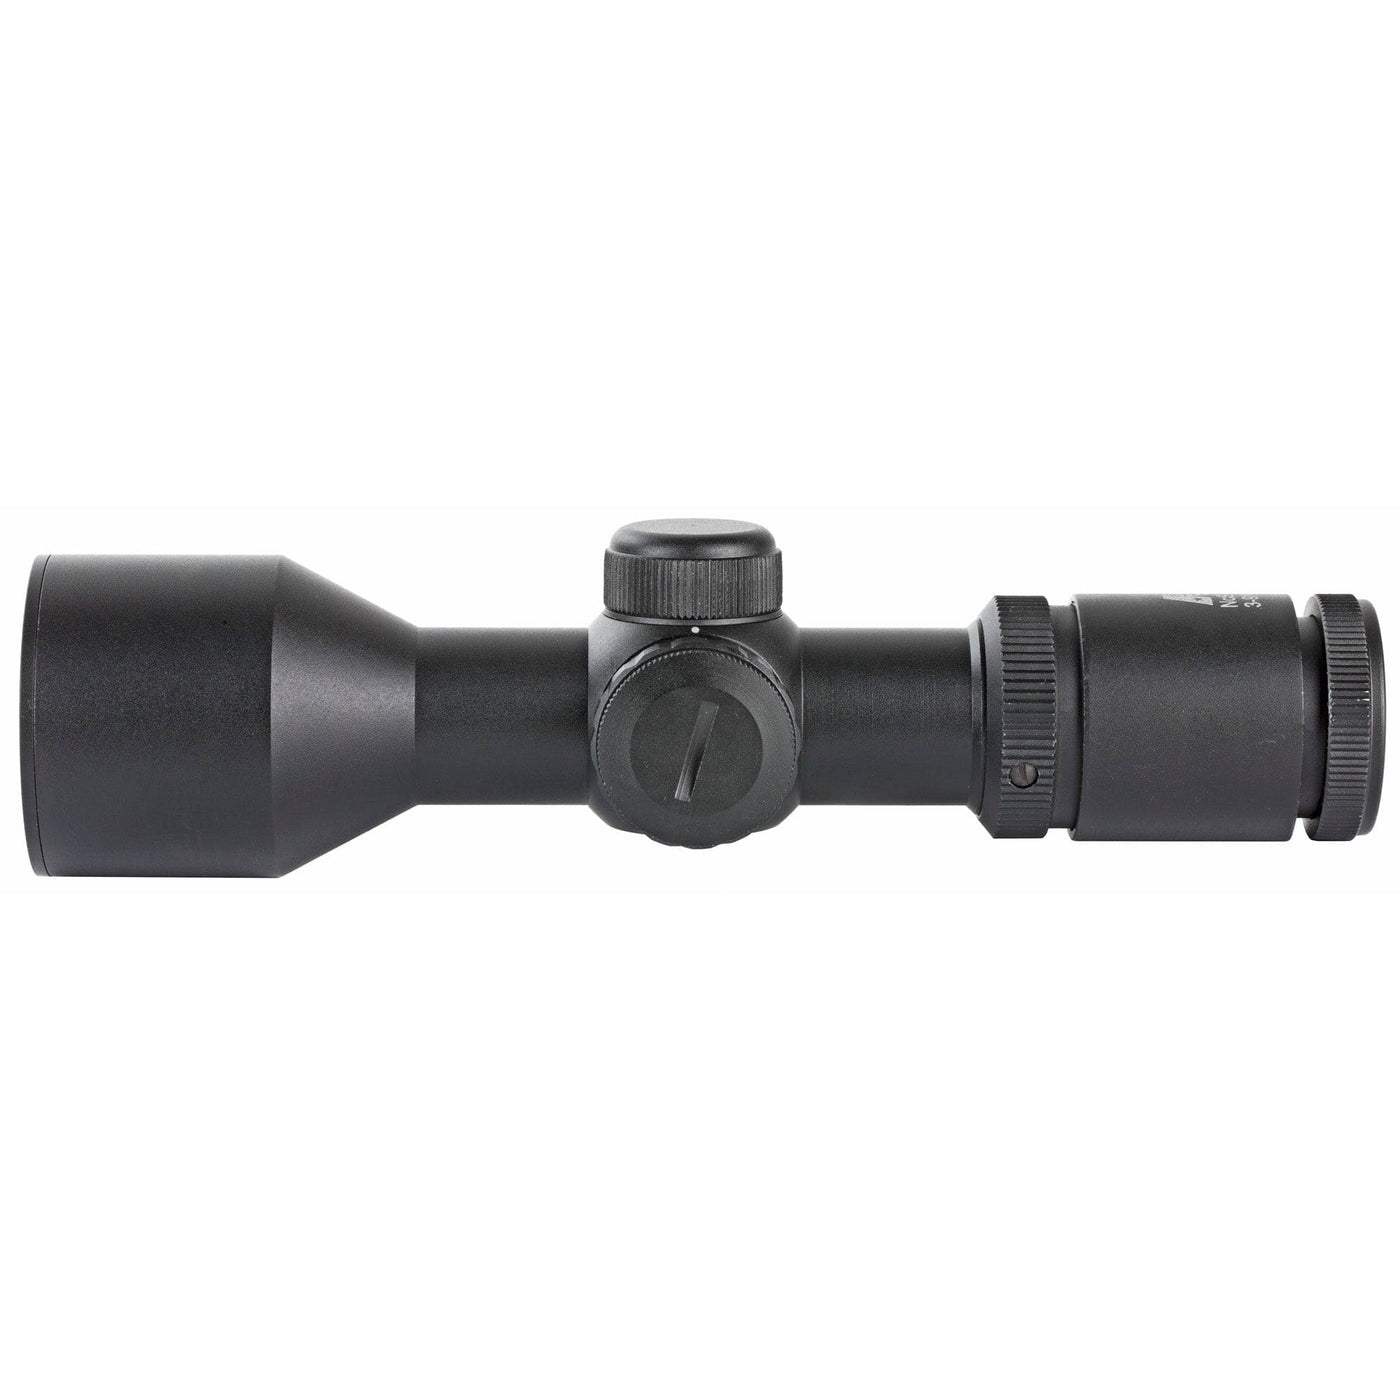 NCSTAR Ncstar Compact Scope 3-9x42 Scopes